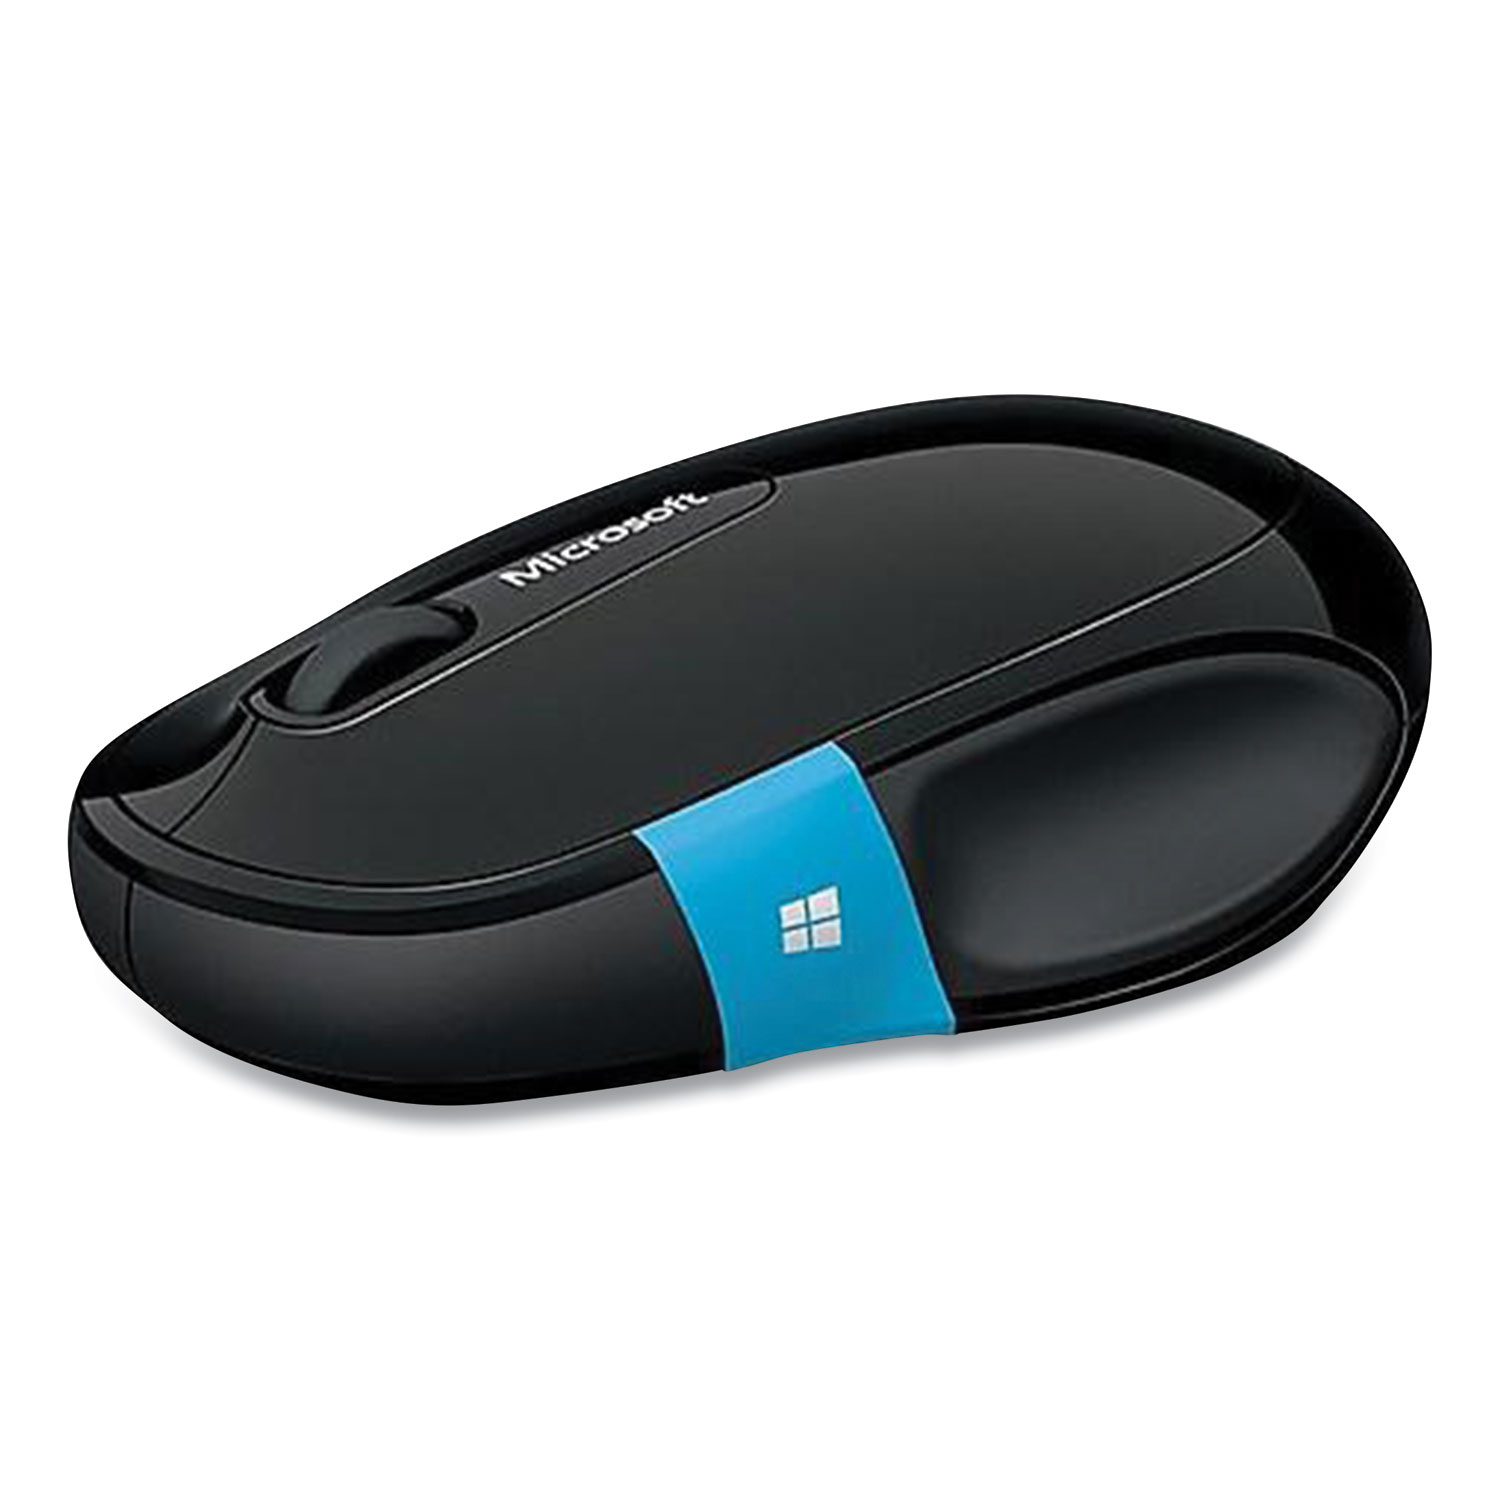  Microsoft H3S-00003 Sculpt Comfort Bluetooth Optical Mouse, 33 ft Wireless Range, Right Hand Use, Black/Blue (MSF187956) 